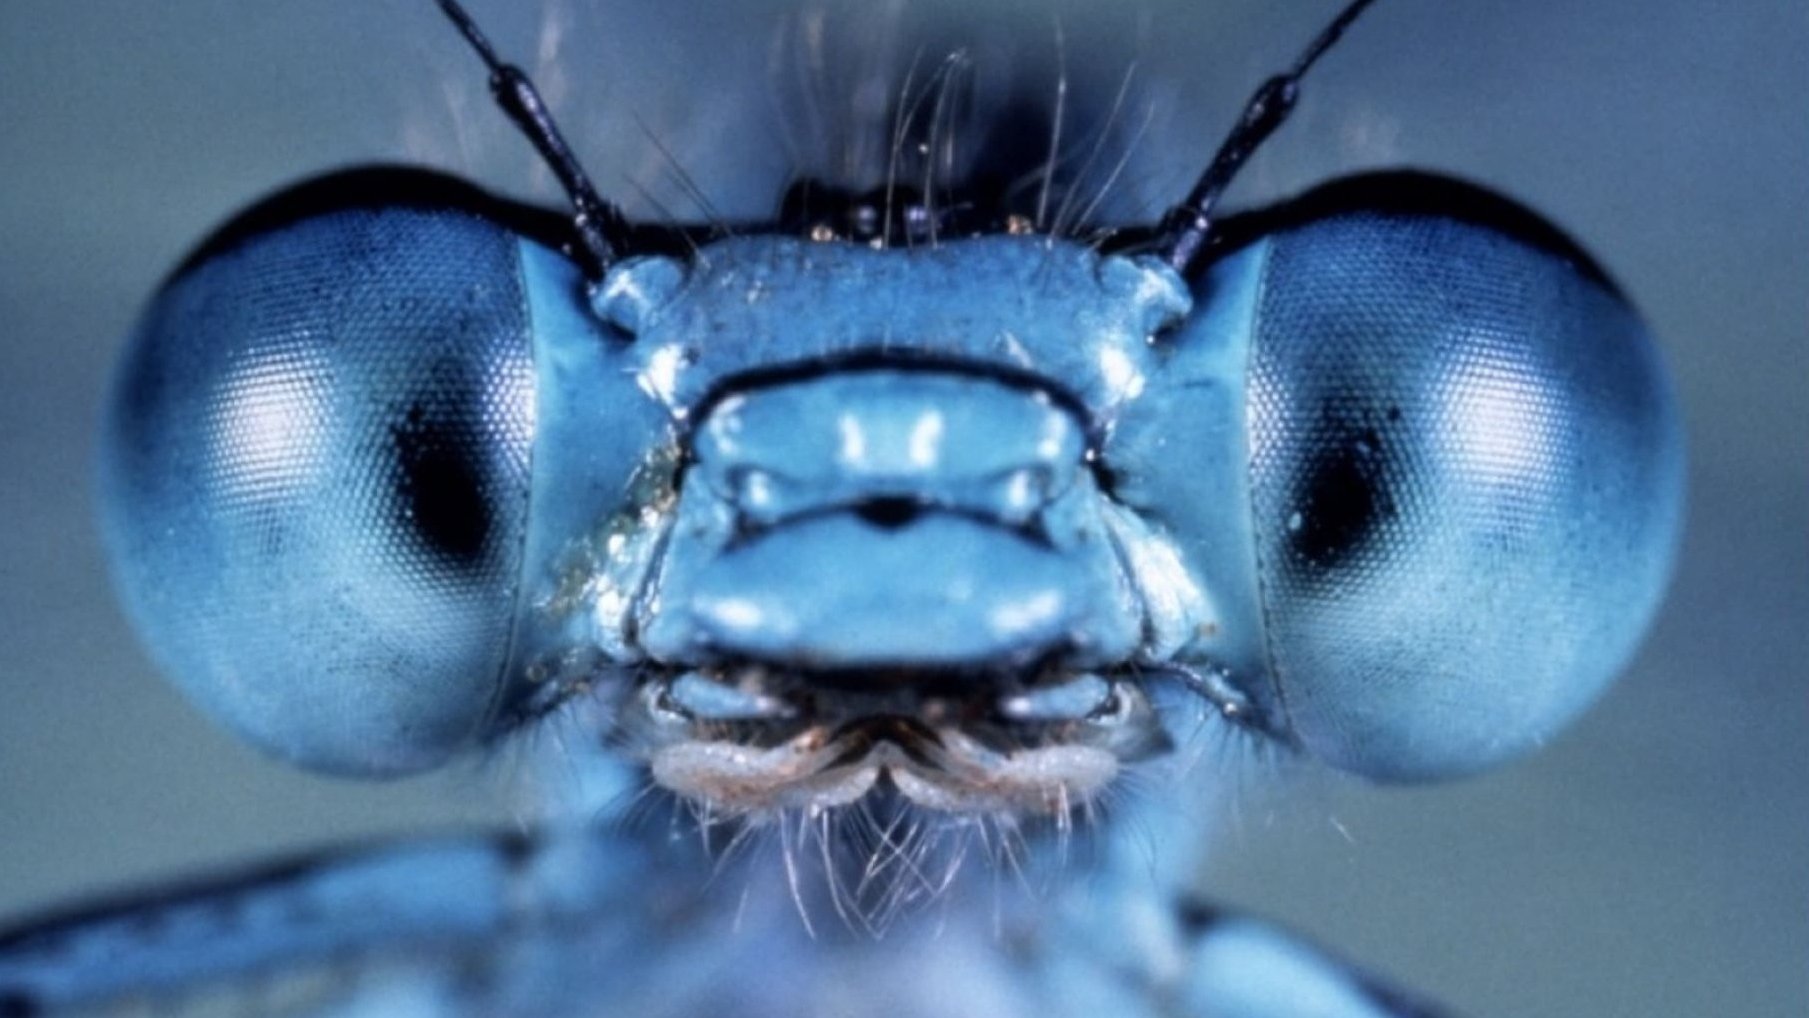 Close-up of an insect on a blue background.